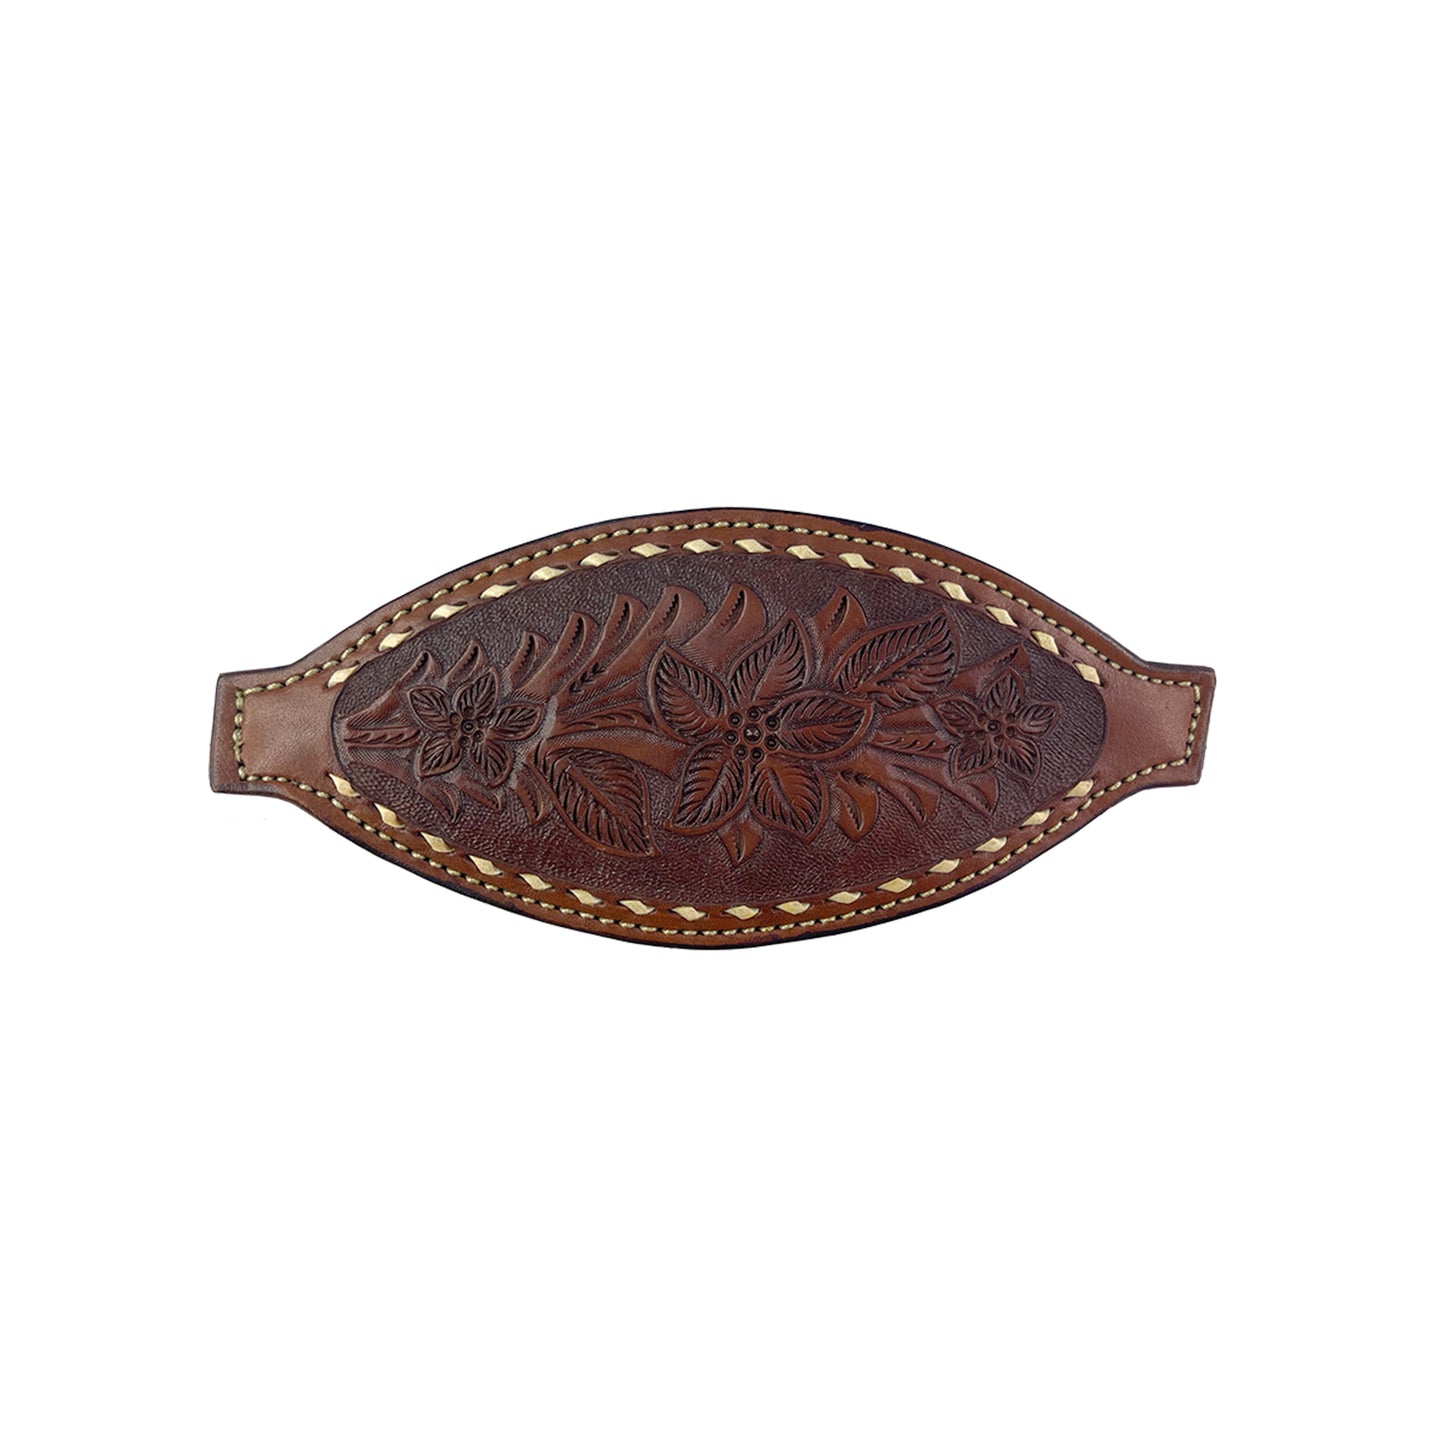 Bronc nose toast leather AA tooling with rawhide buckstitch.